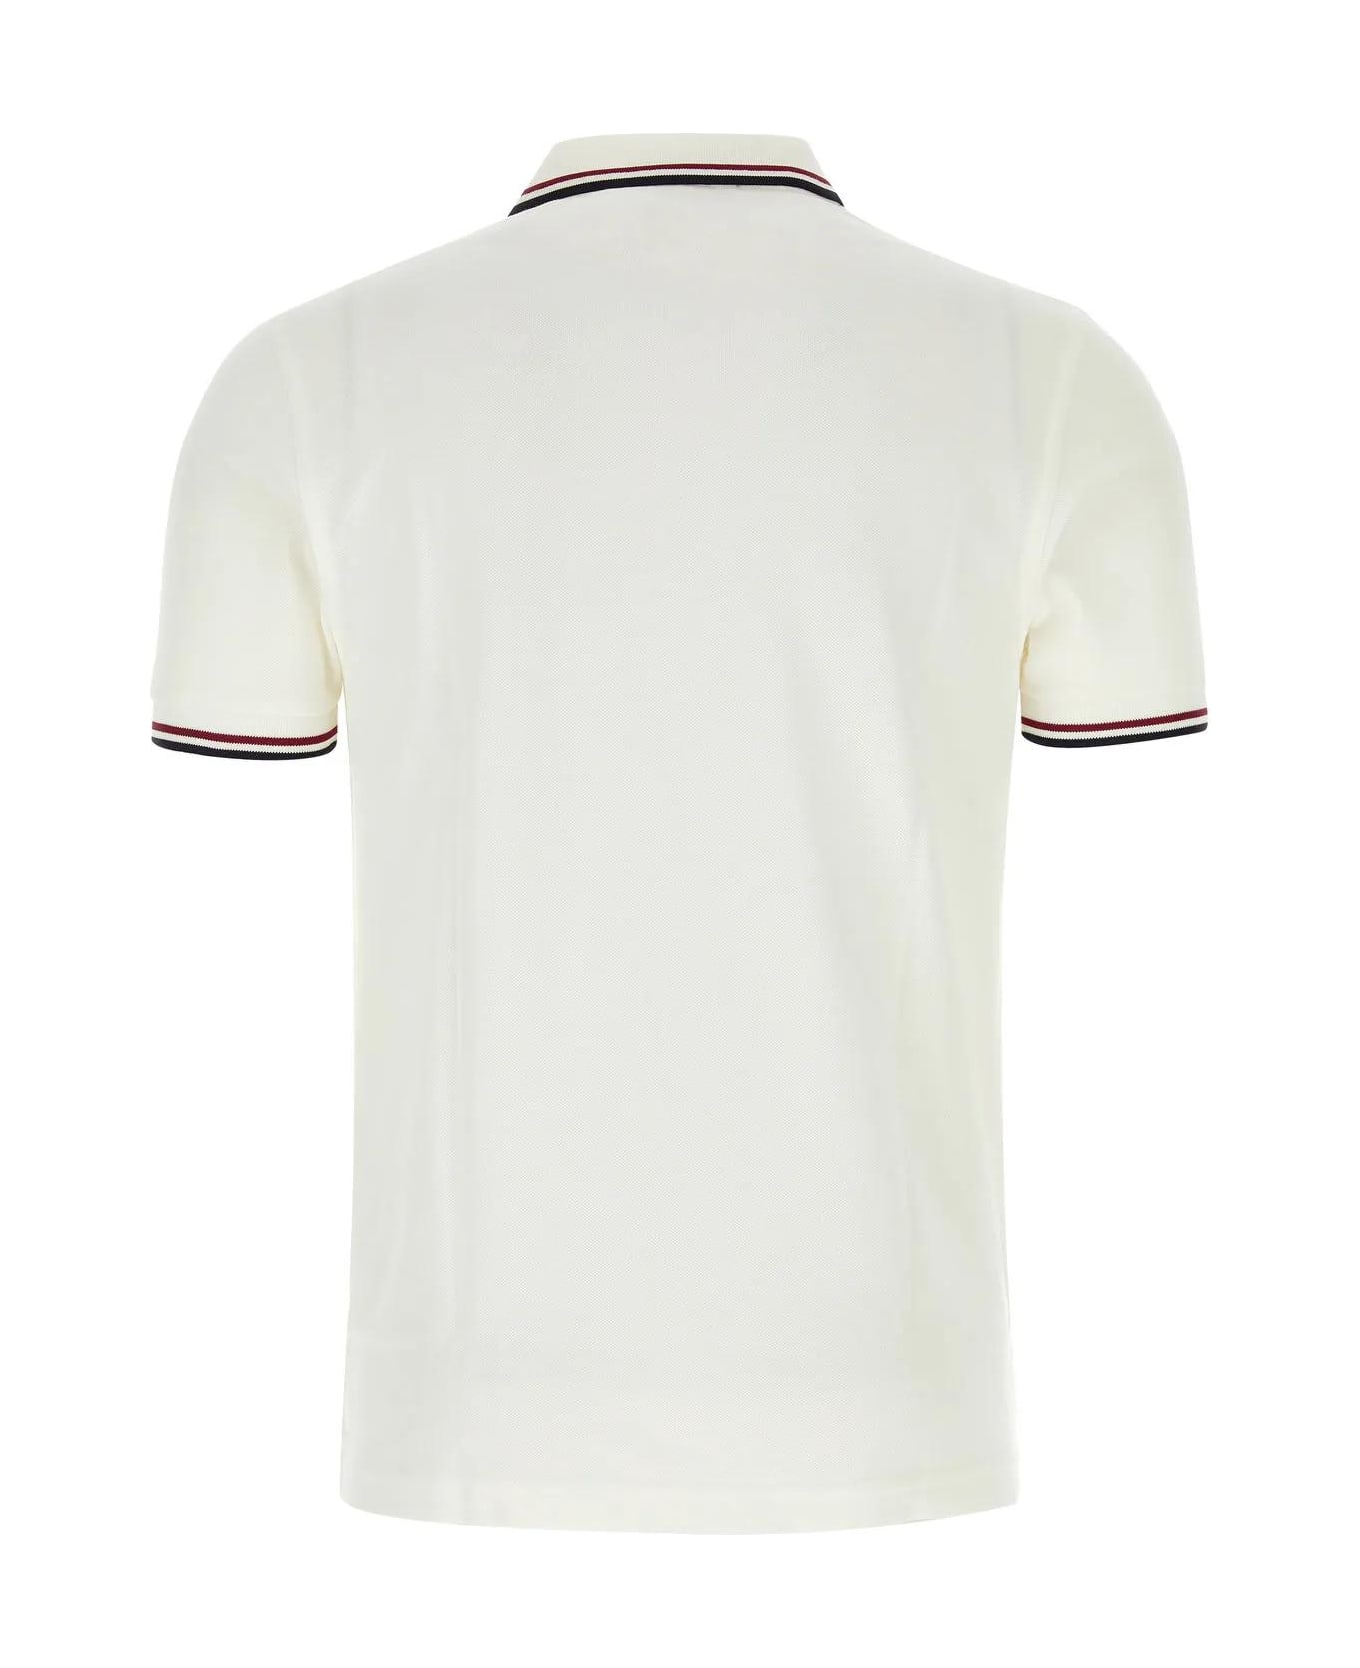 Fred Perry White Pouches Polo Shirt - Snwht/bred/nvy